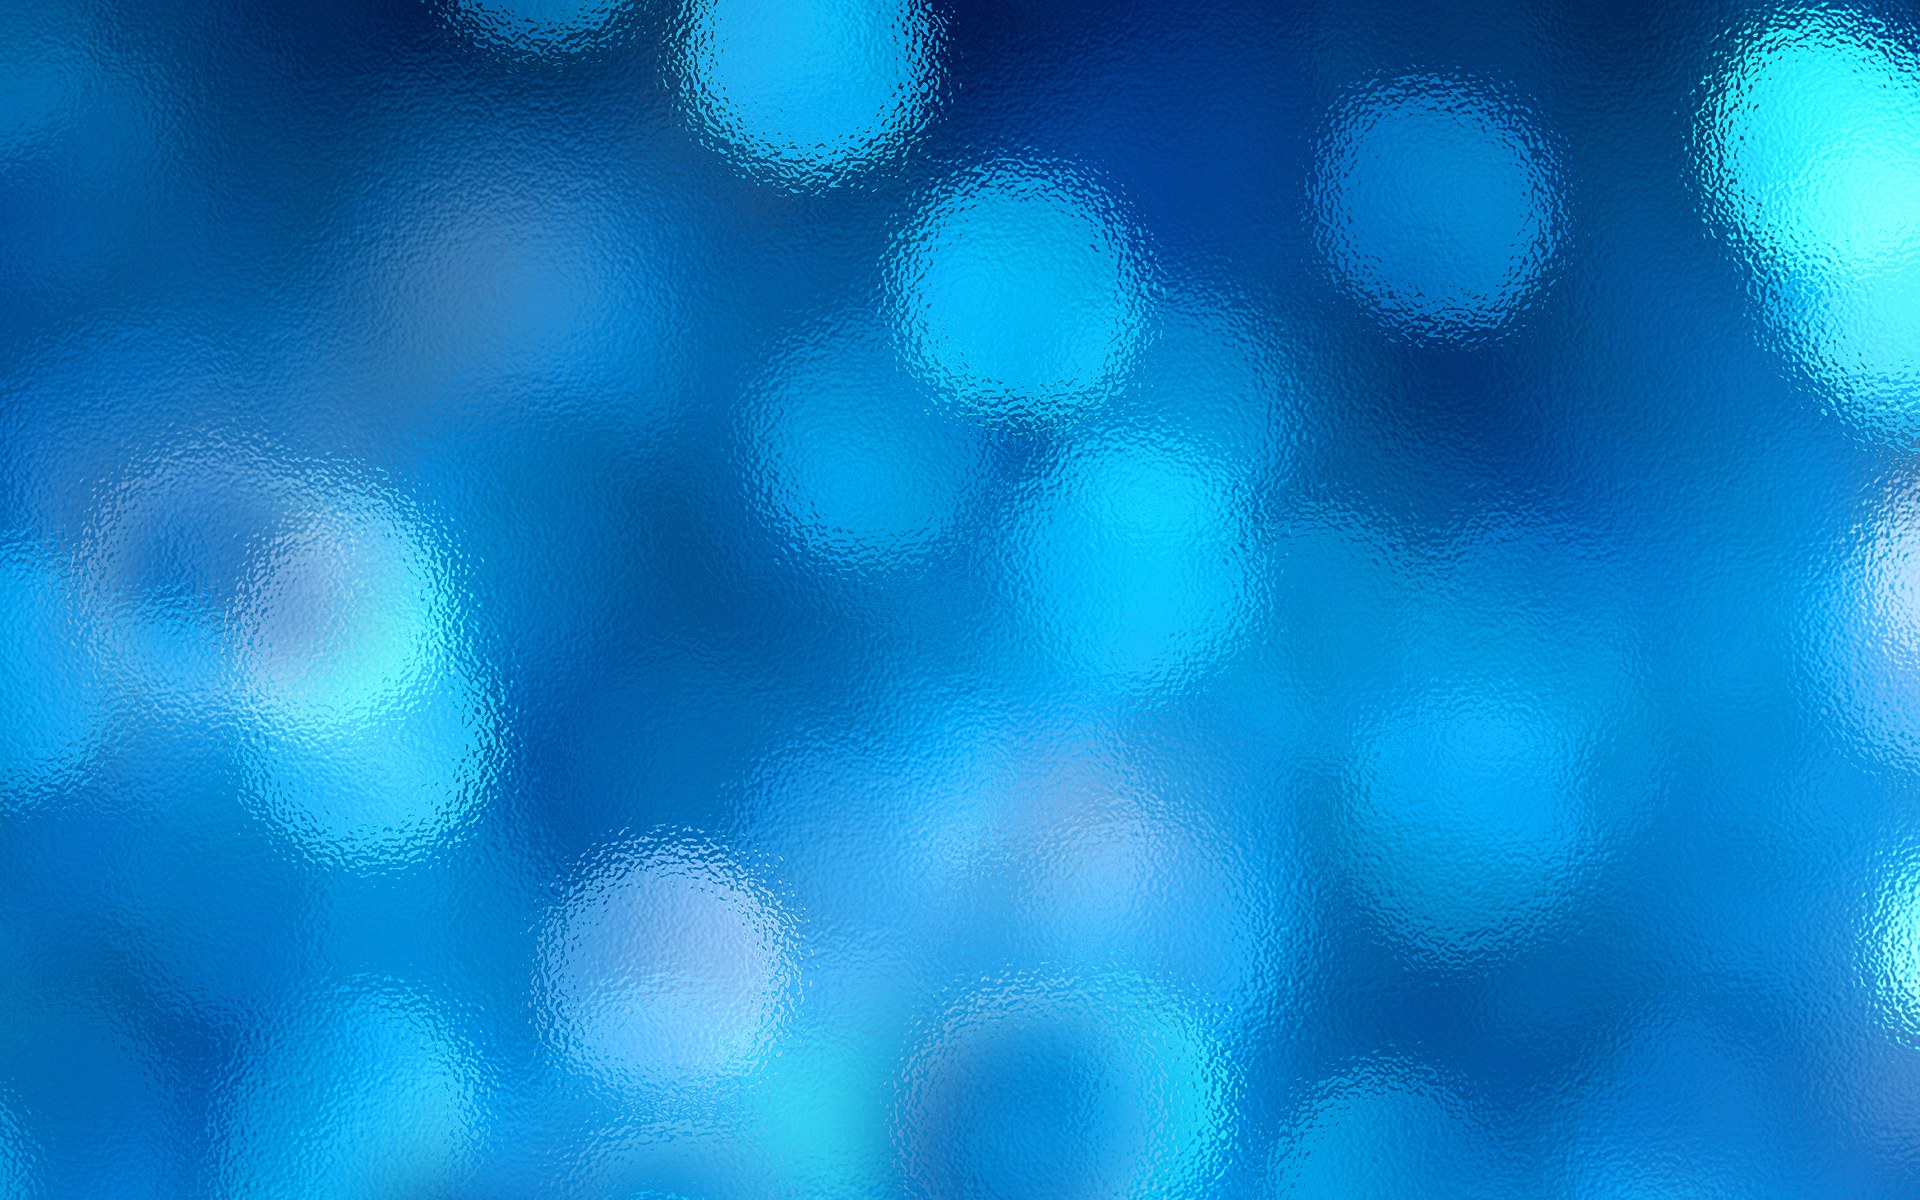 Wp Content Uploads Abstract Blue Background Jpg